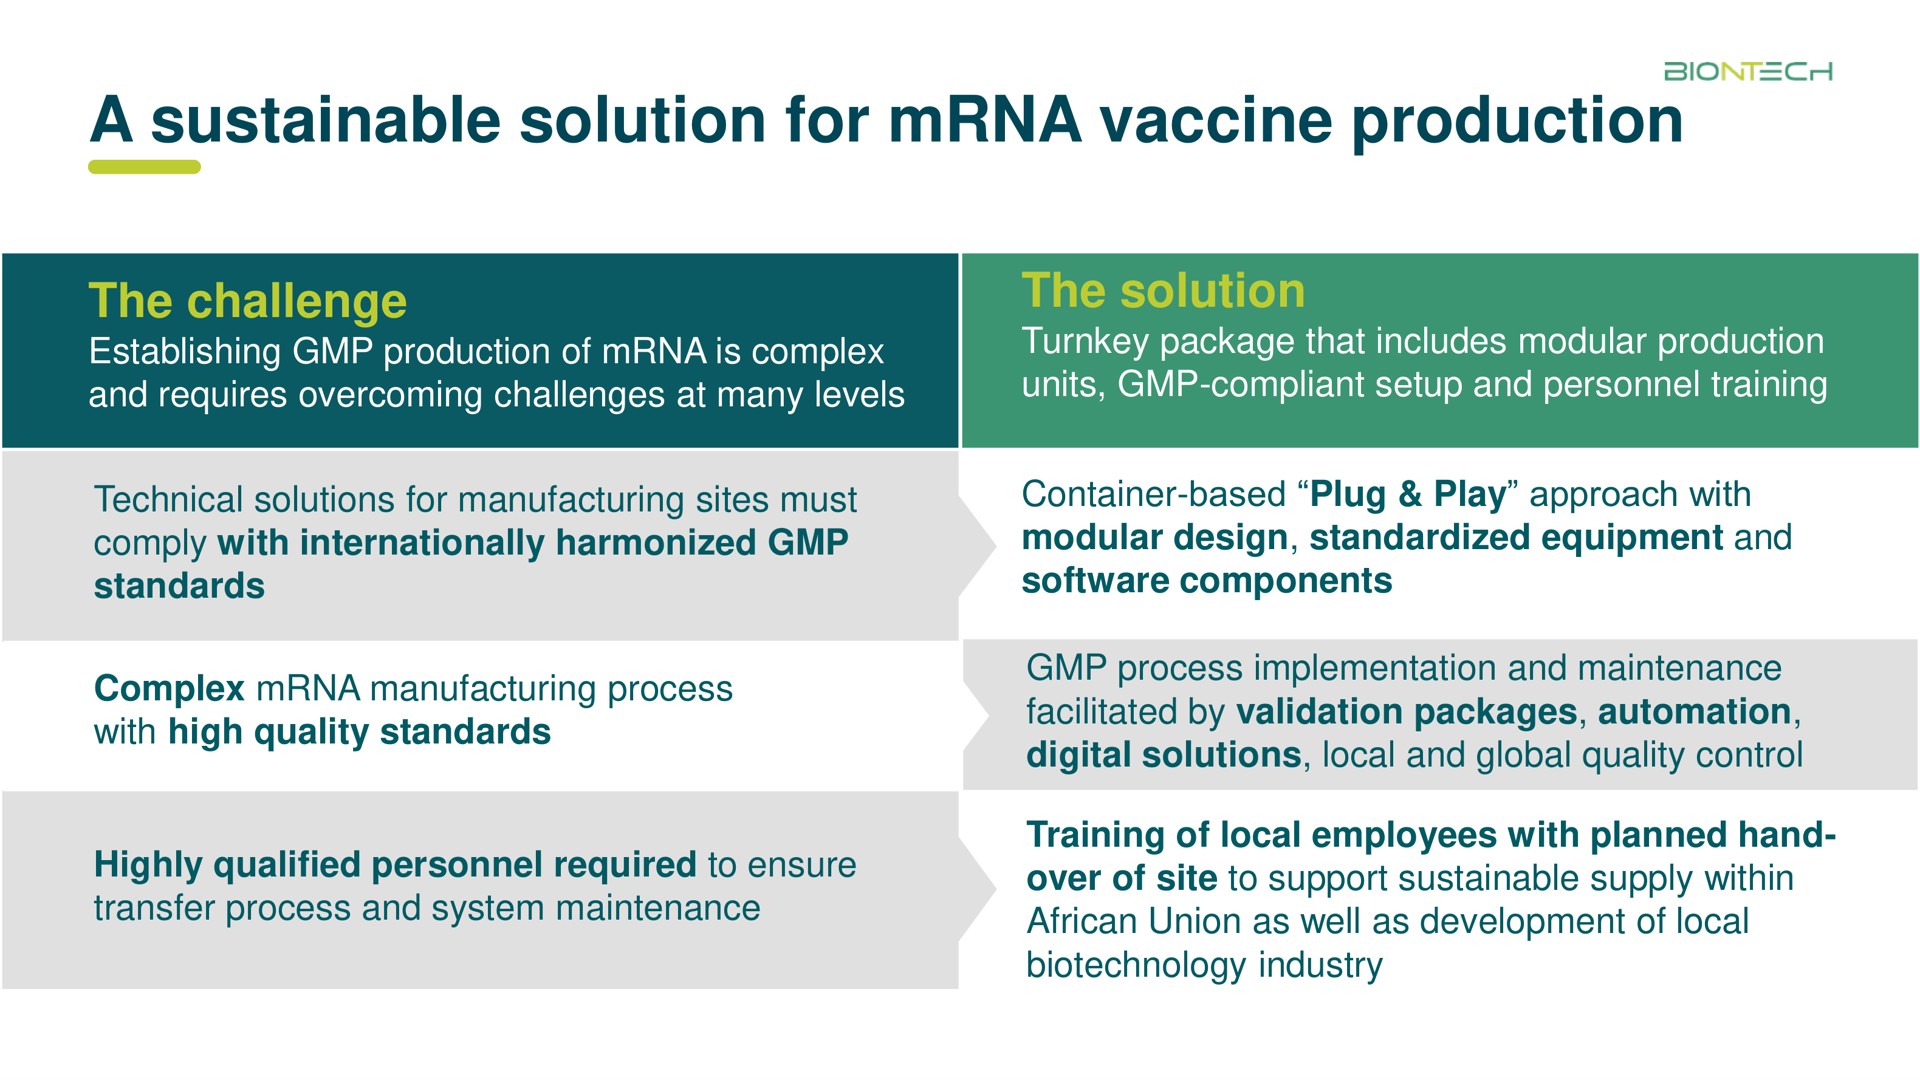 a sustainable solution for vaccine production | BioNTech